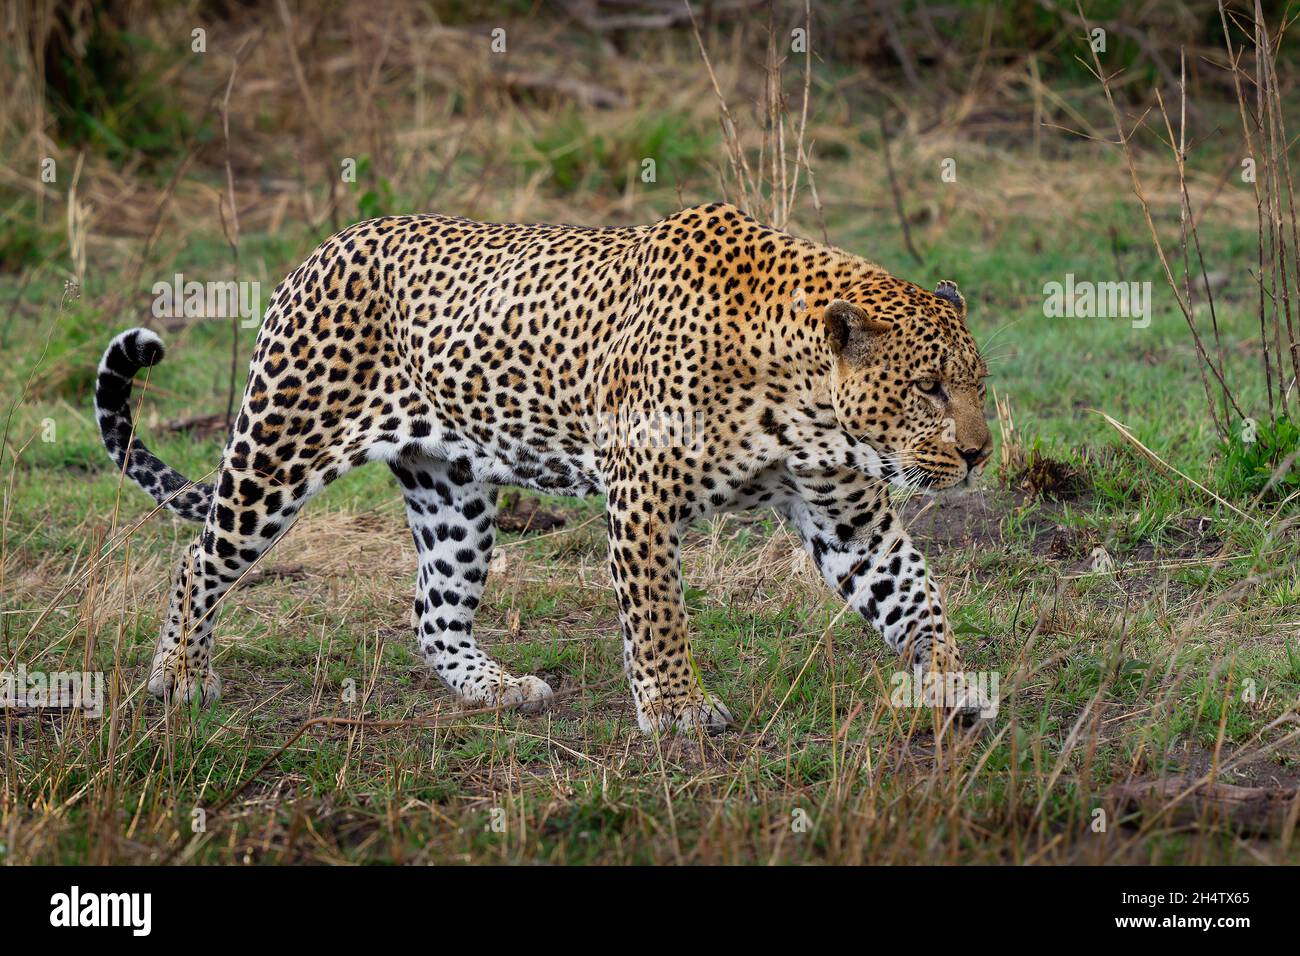 Leopard - Panthera pardus, big spotted yellow cat in Africa, genus Panthera cat family Felidae, portrait in the bush in Africa, adult male rest, yawn Stock Photo